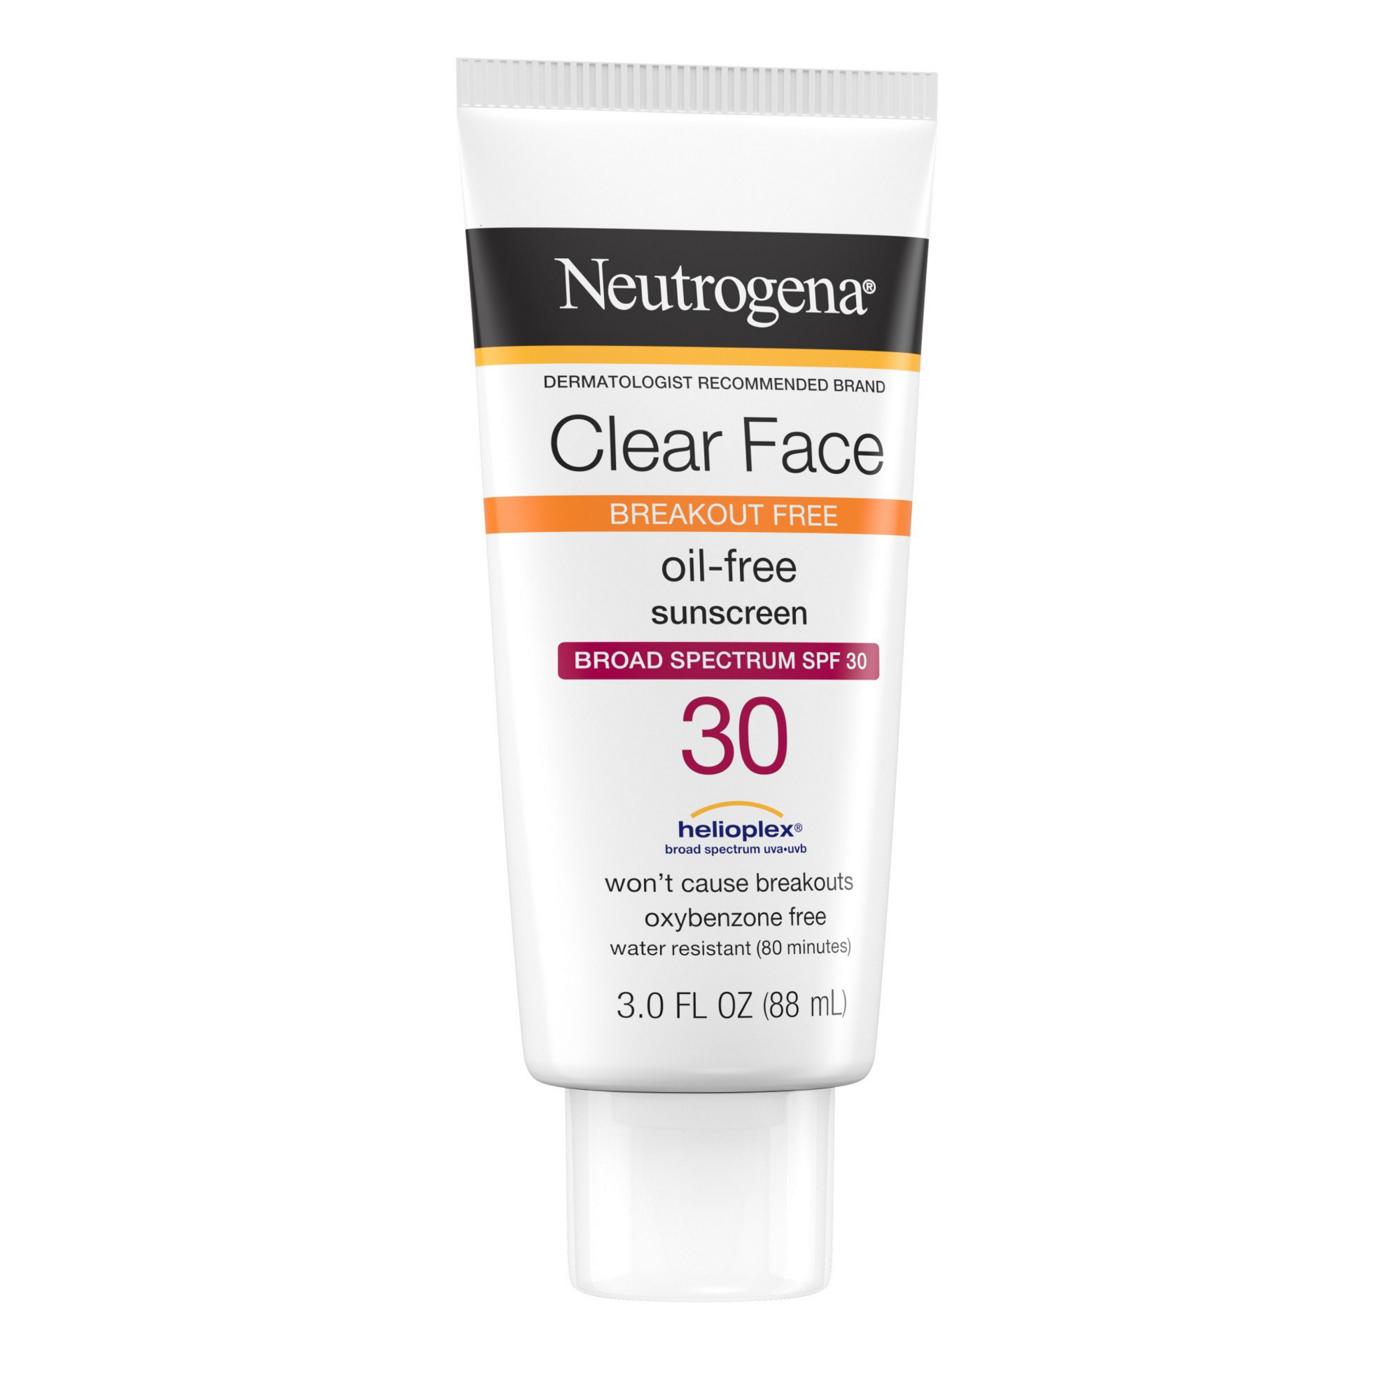 Neutrogena Clear Face Oil-Free Sunscreen SPF 30; image 2 of 8